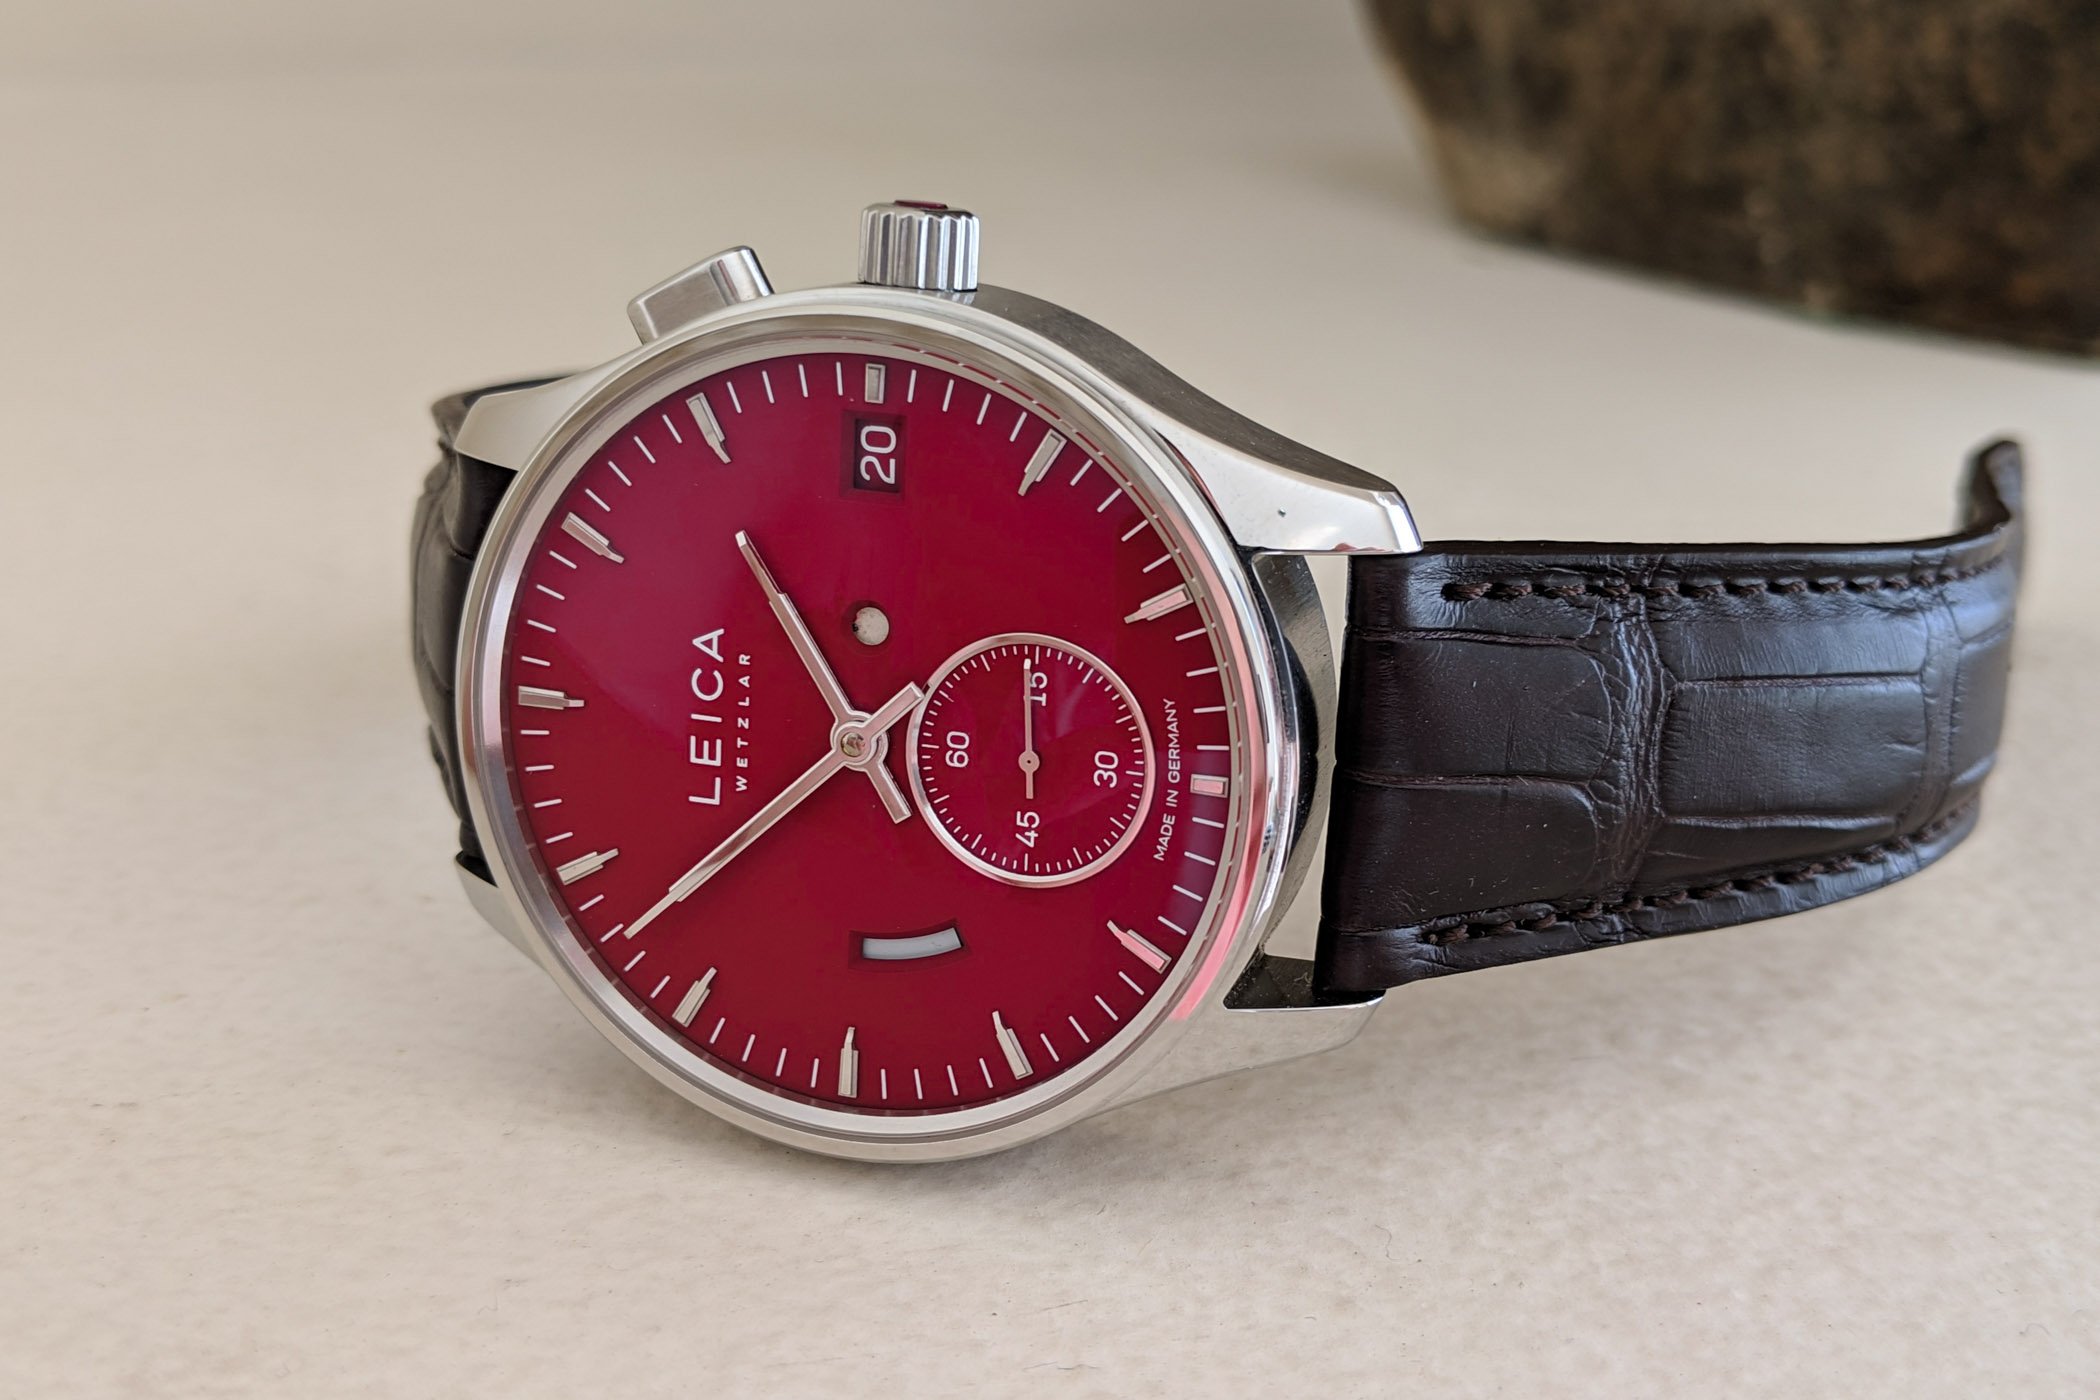 Leica-Watch-L1-and-L2-Review-18.jpg